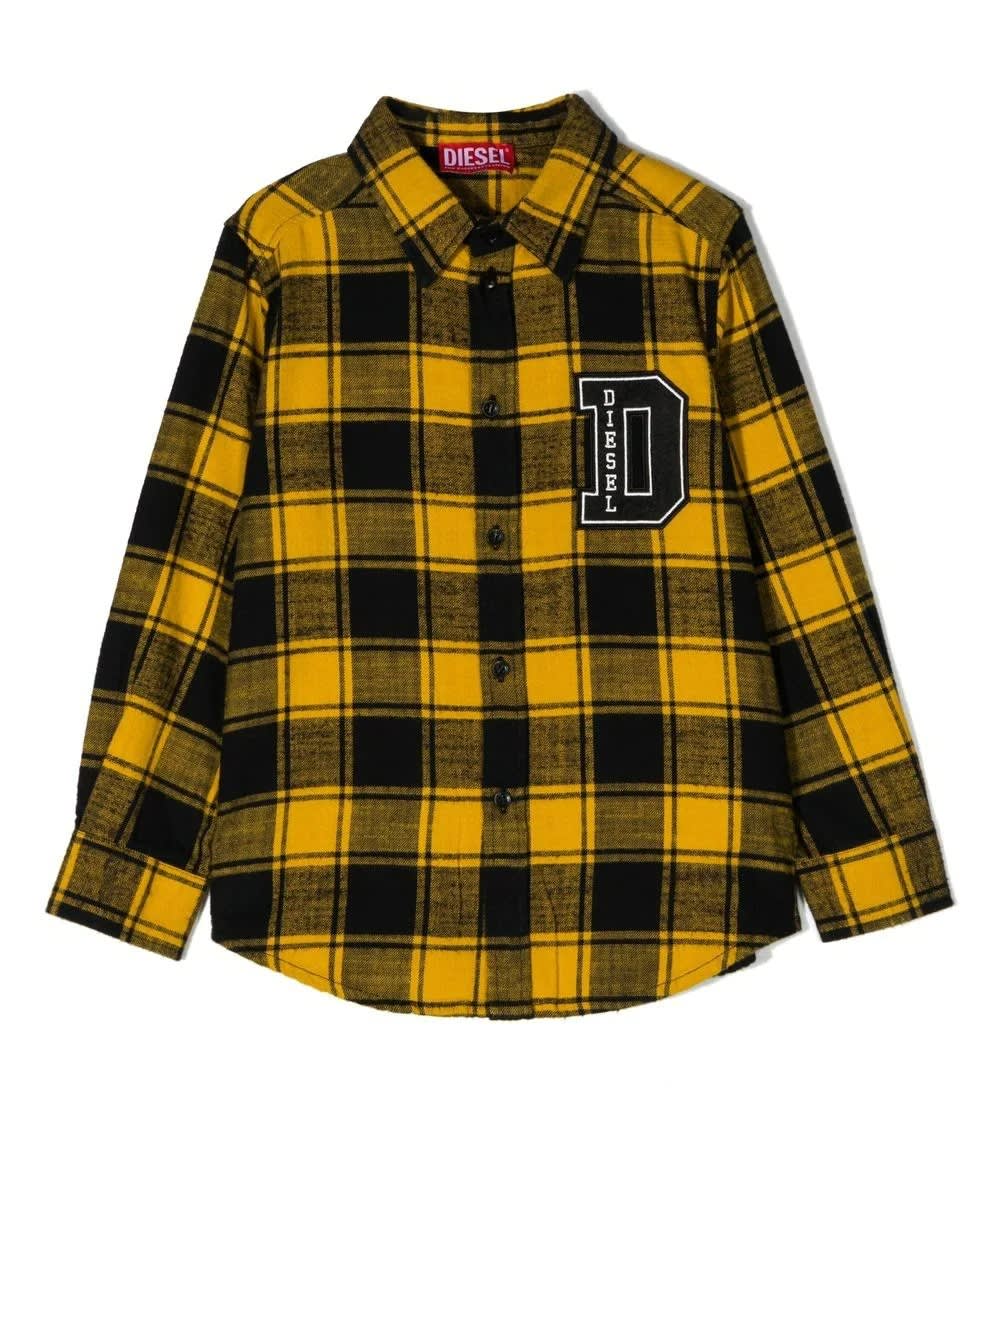 Diesel Kids Yellow Shirt With Check Pattern And Dsl Brave Print